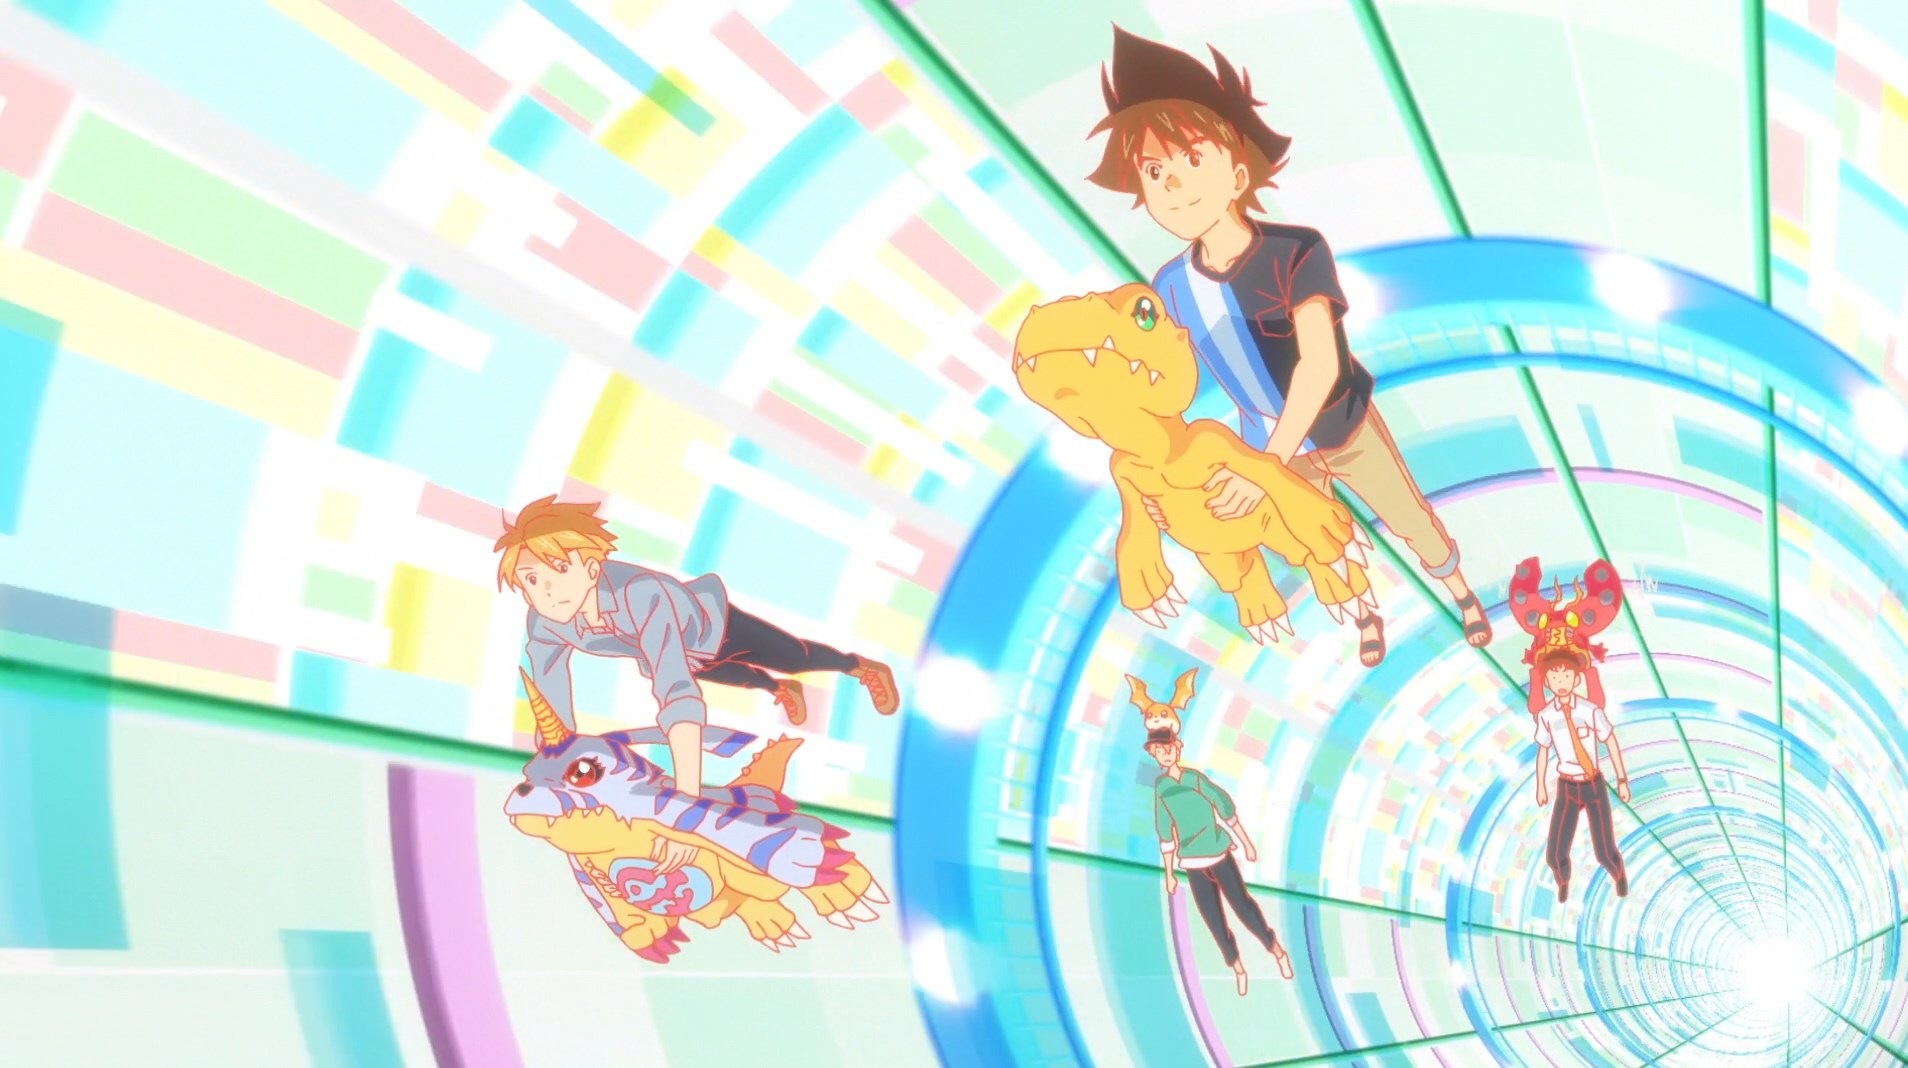 Digimon Adventure 02 Review - The Game of Nerds